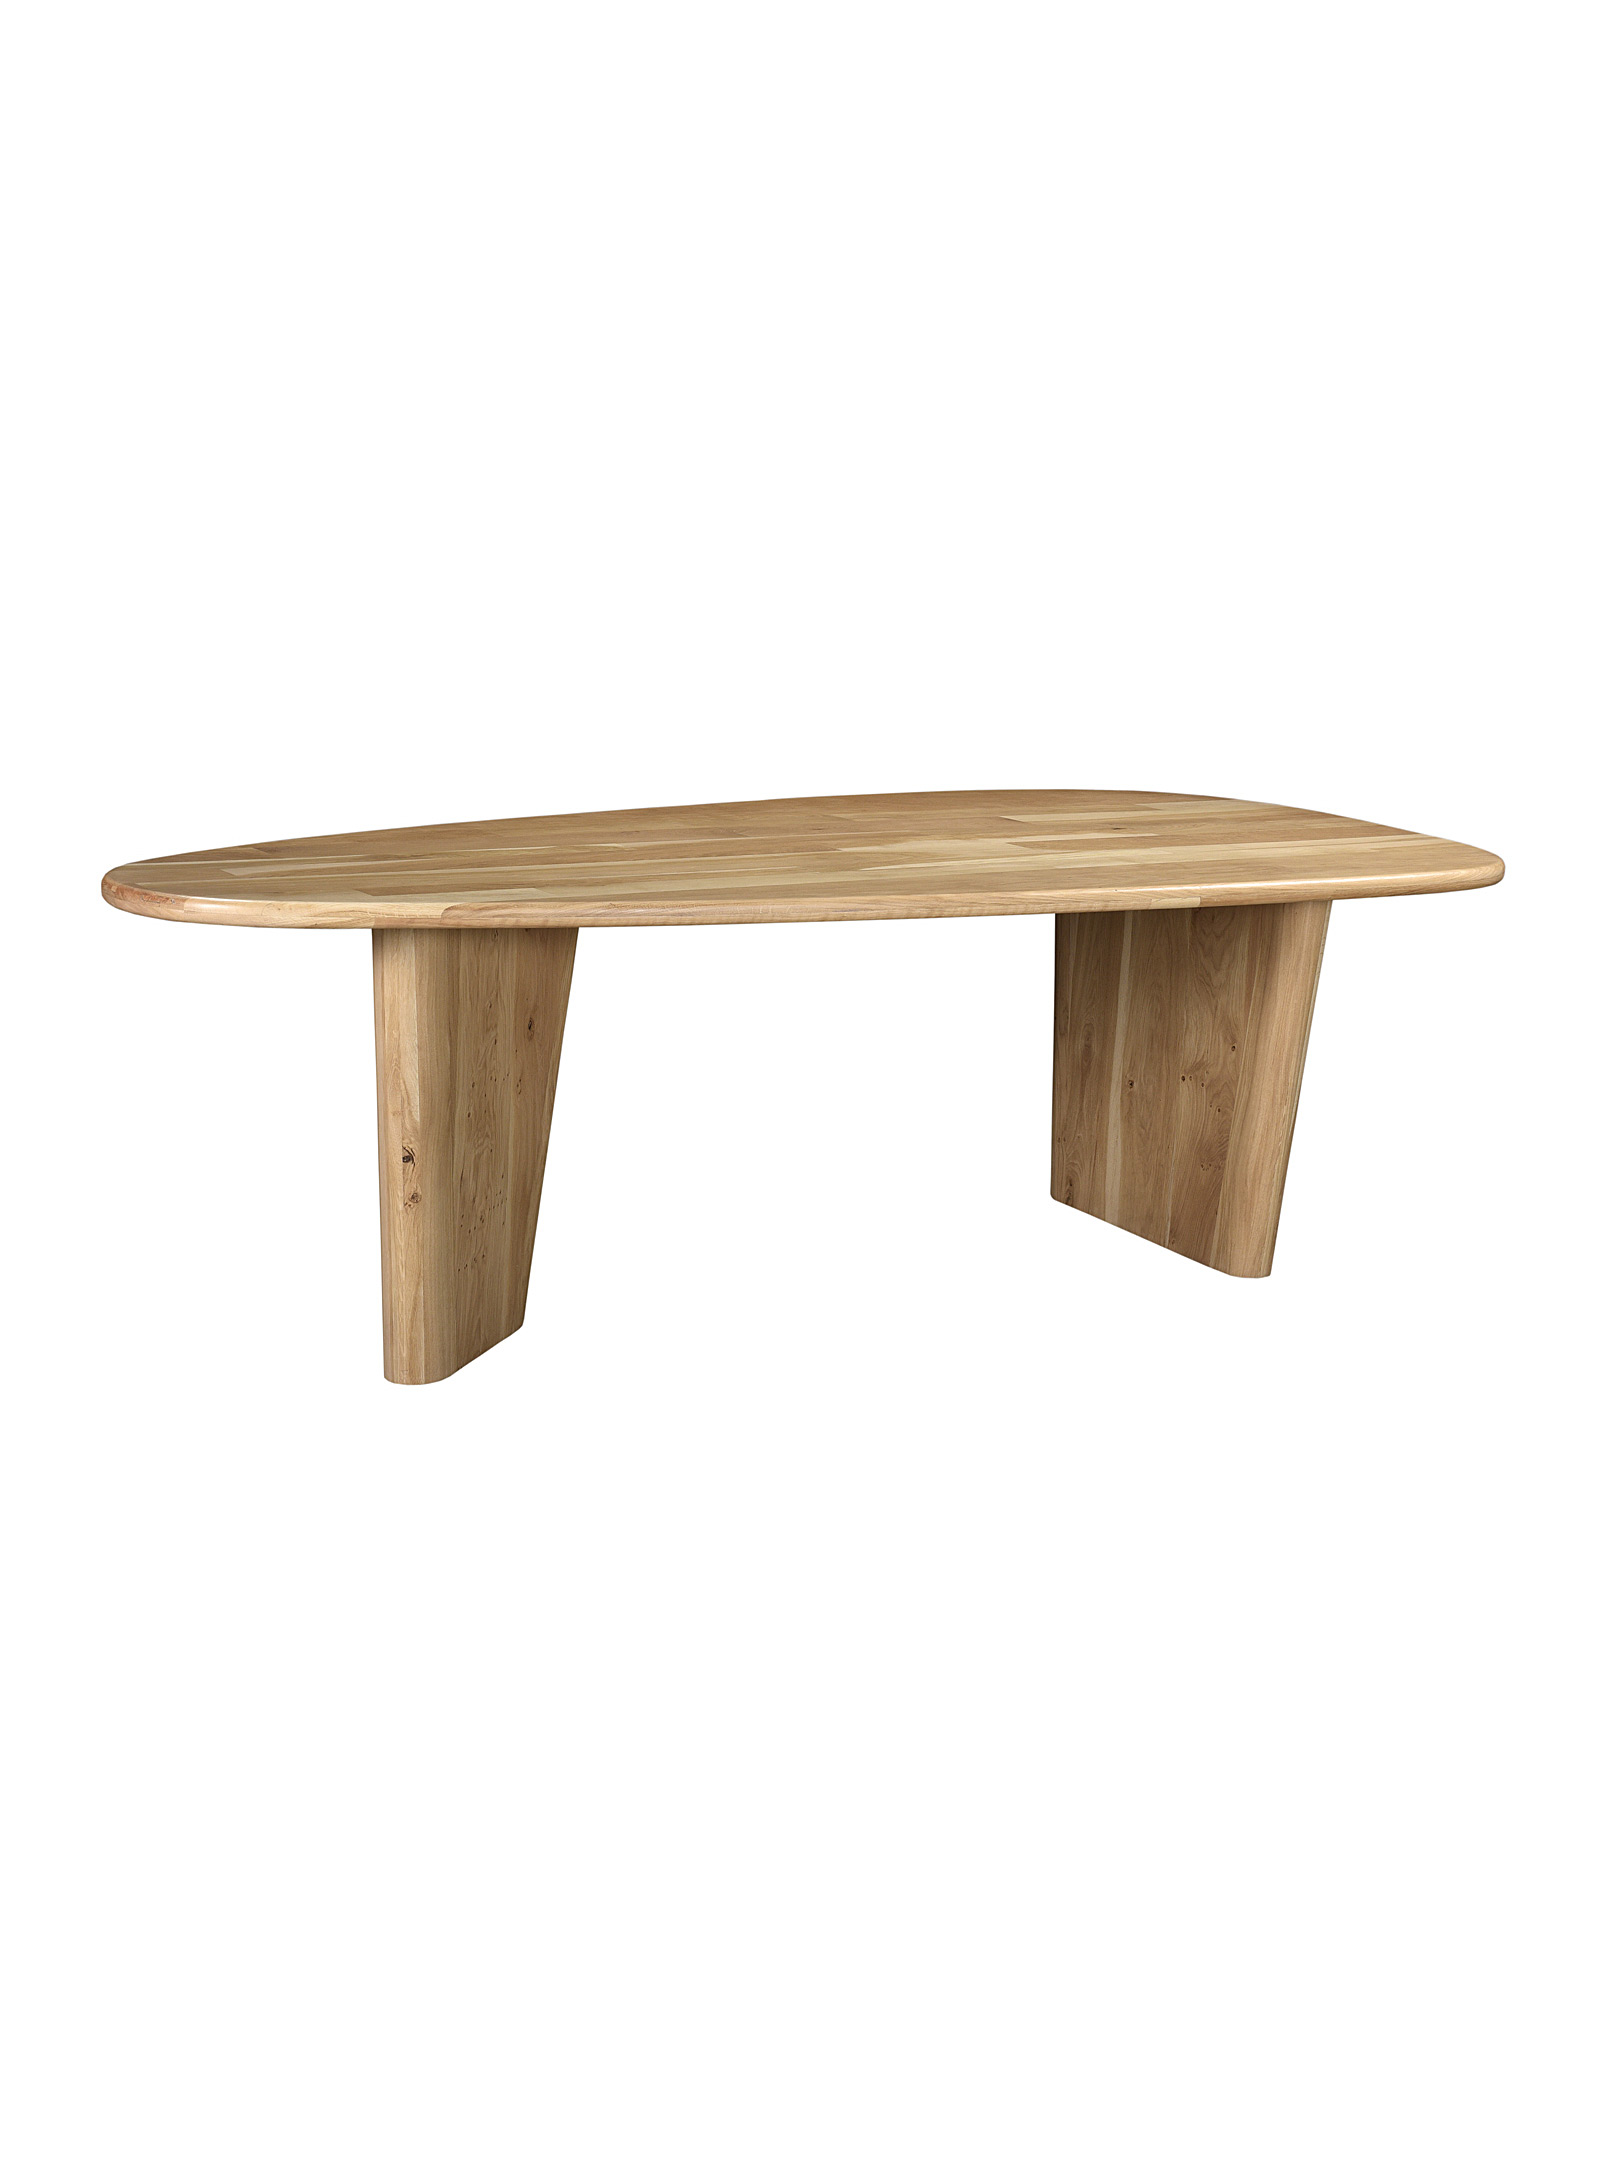 Moe's Home Collection - Appro white oak wood dining table